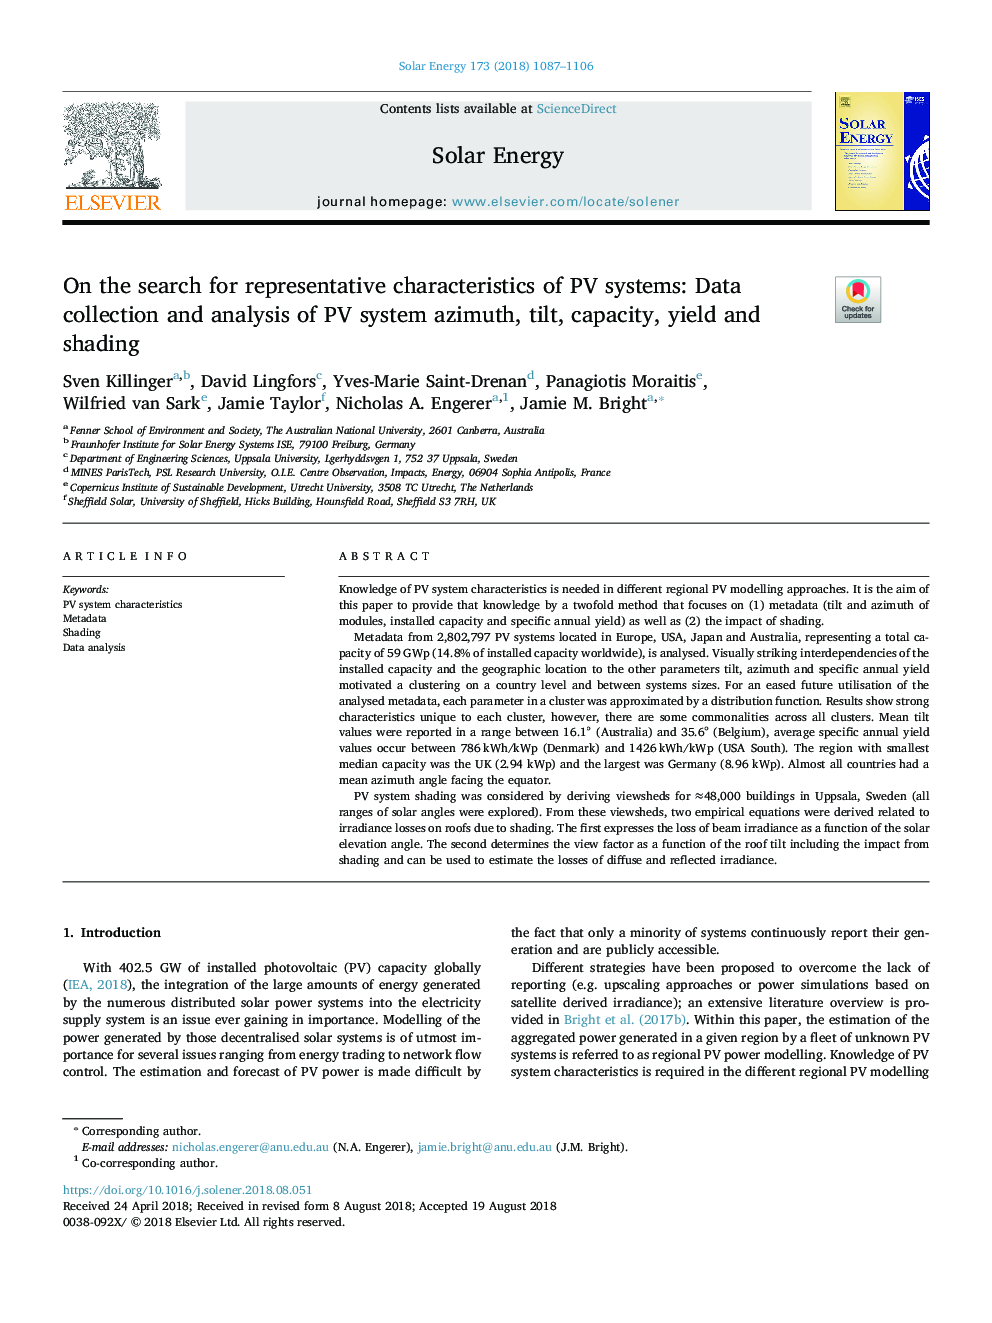 On the search for representative characteristics of PV systems: Data collection and analysis of PV system azimuth, tilt, capacity, yield and shading